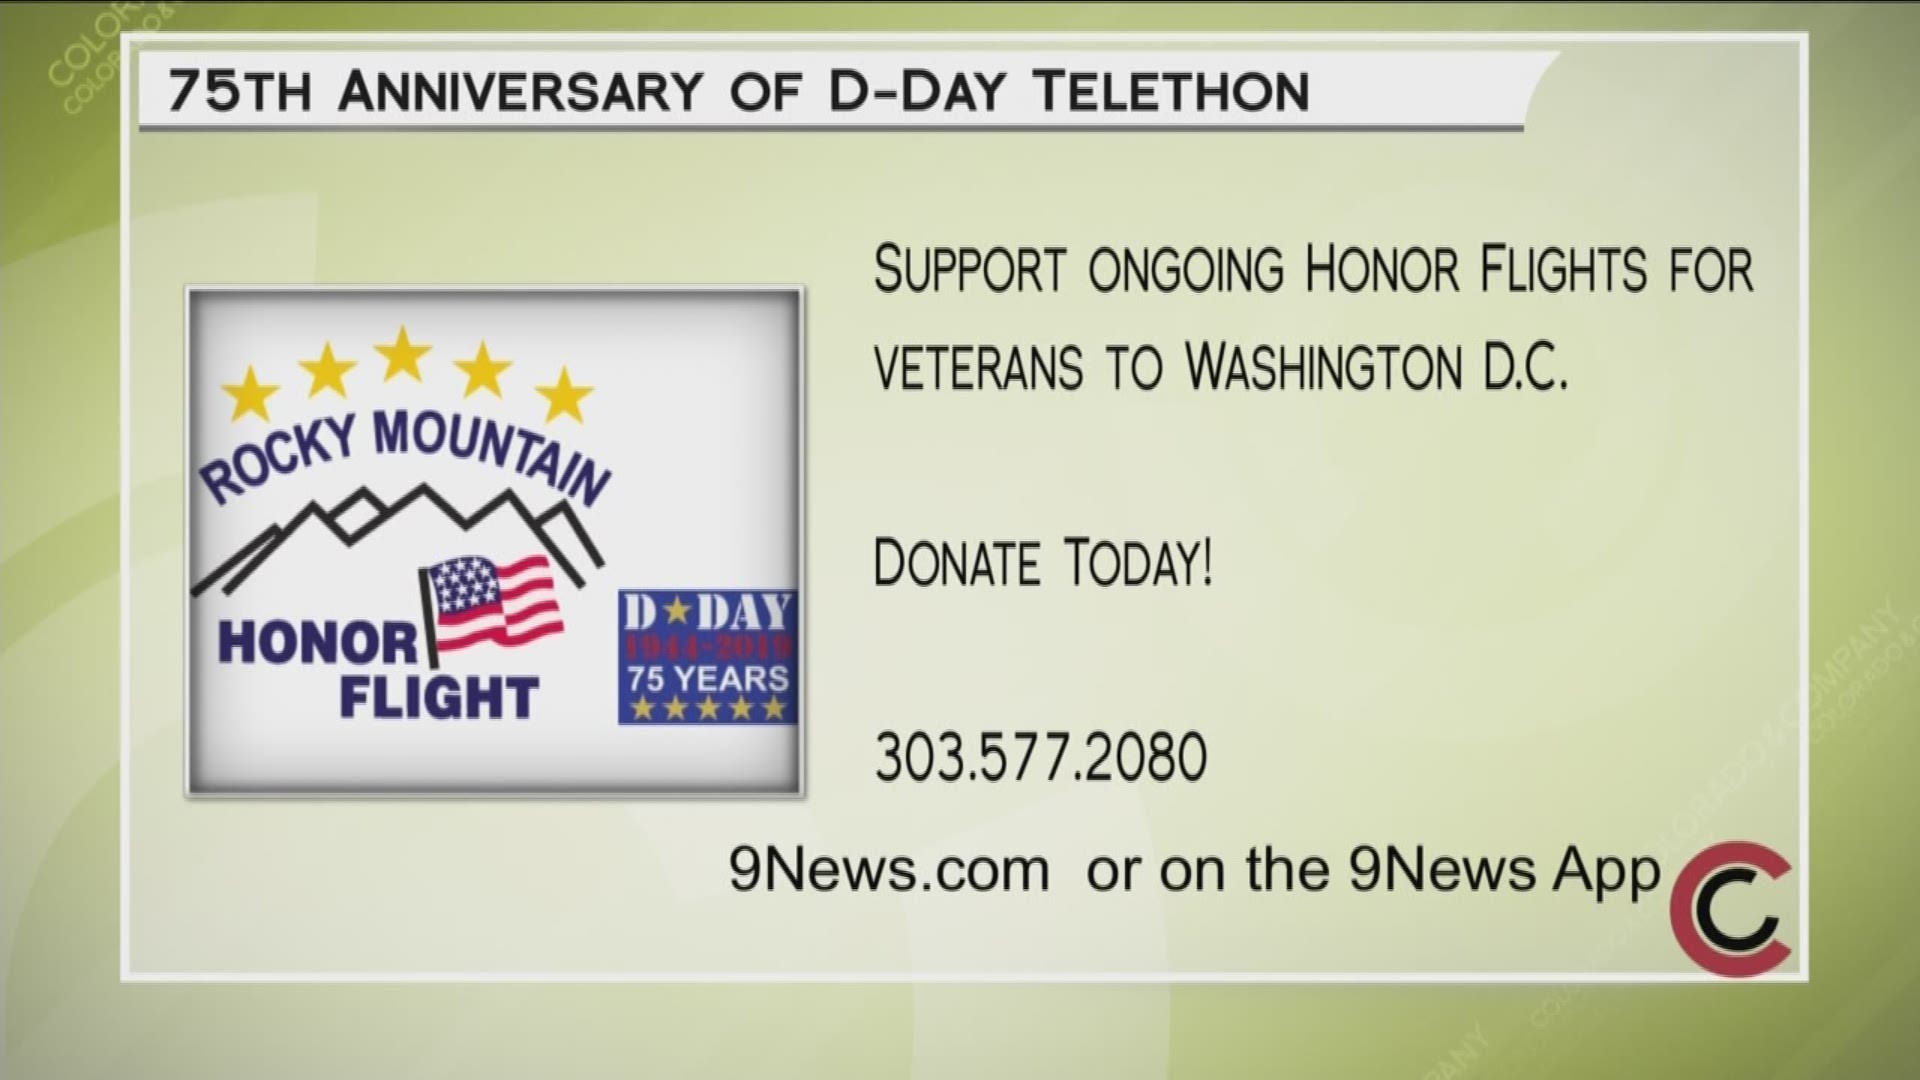 Help support the Rocky Mountain Honor Flight by donating today. Call 303.577.2080. Learn more at www.9News.com or on the 9News App, where you can donate, as well.